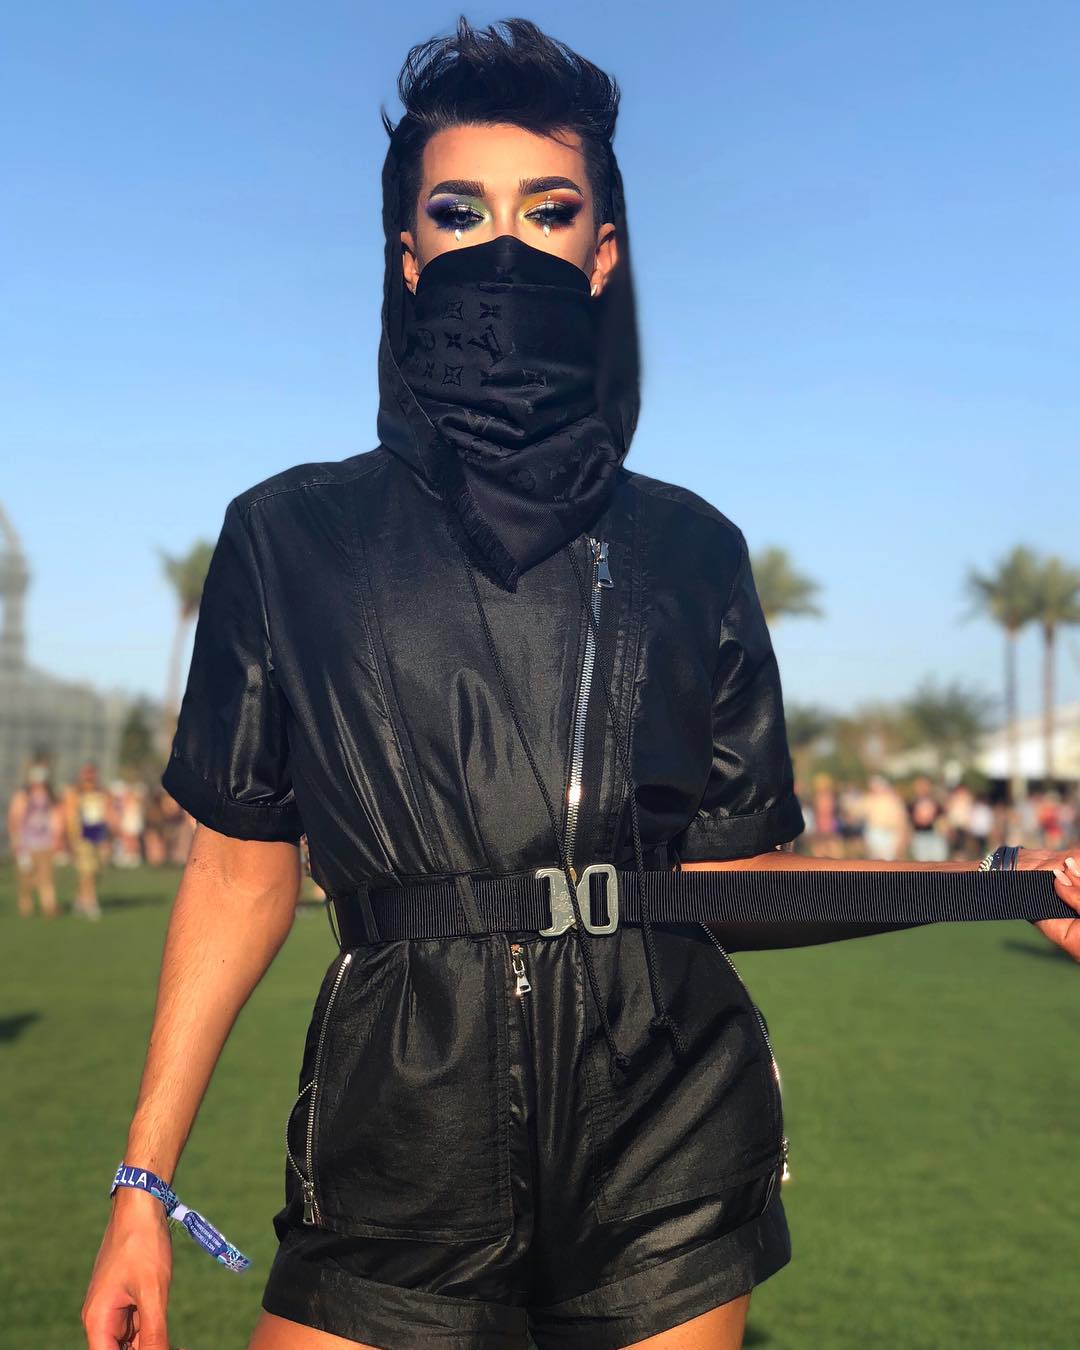 Coachella James Charles Outfit 2018